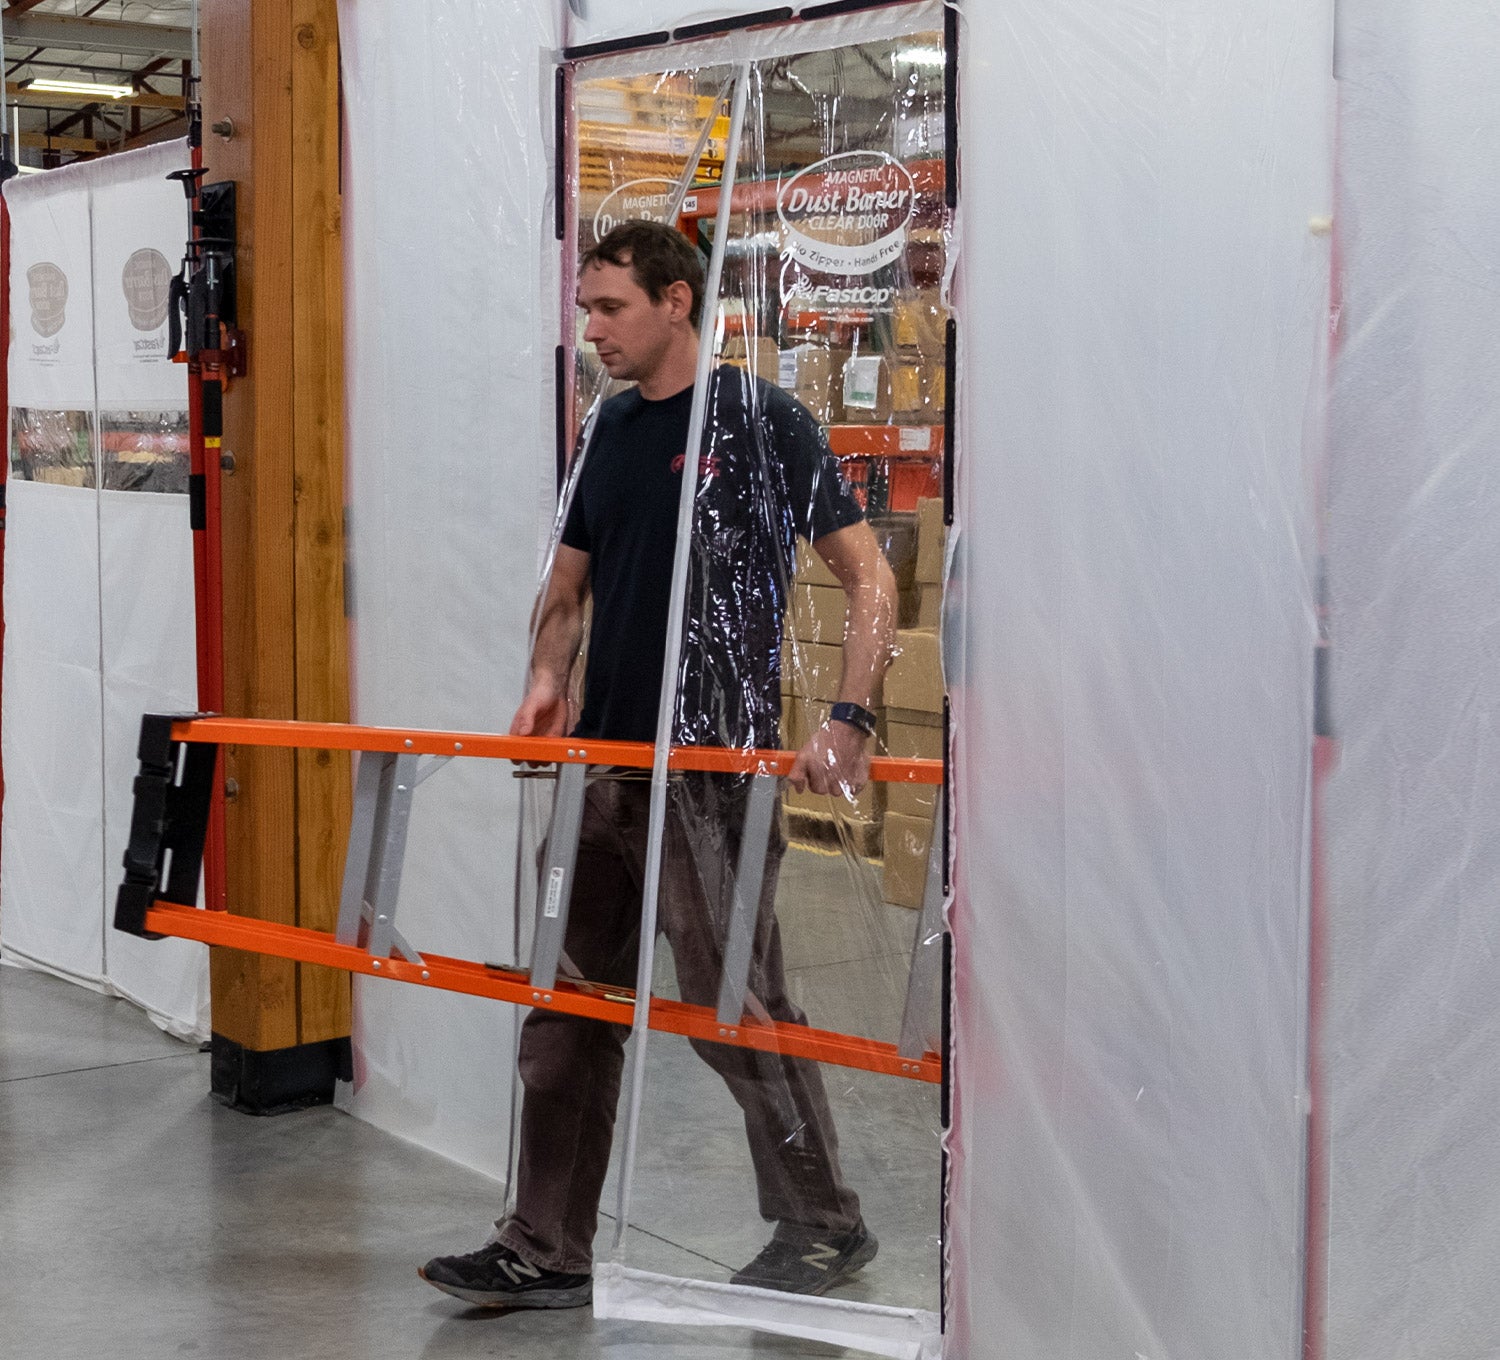 A worker carries a long ladder through a hands-free clear magnetic dust barrier door, which opens automatically for him.